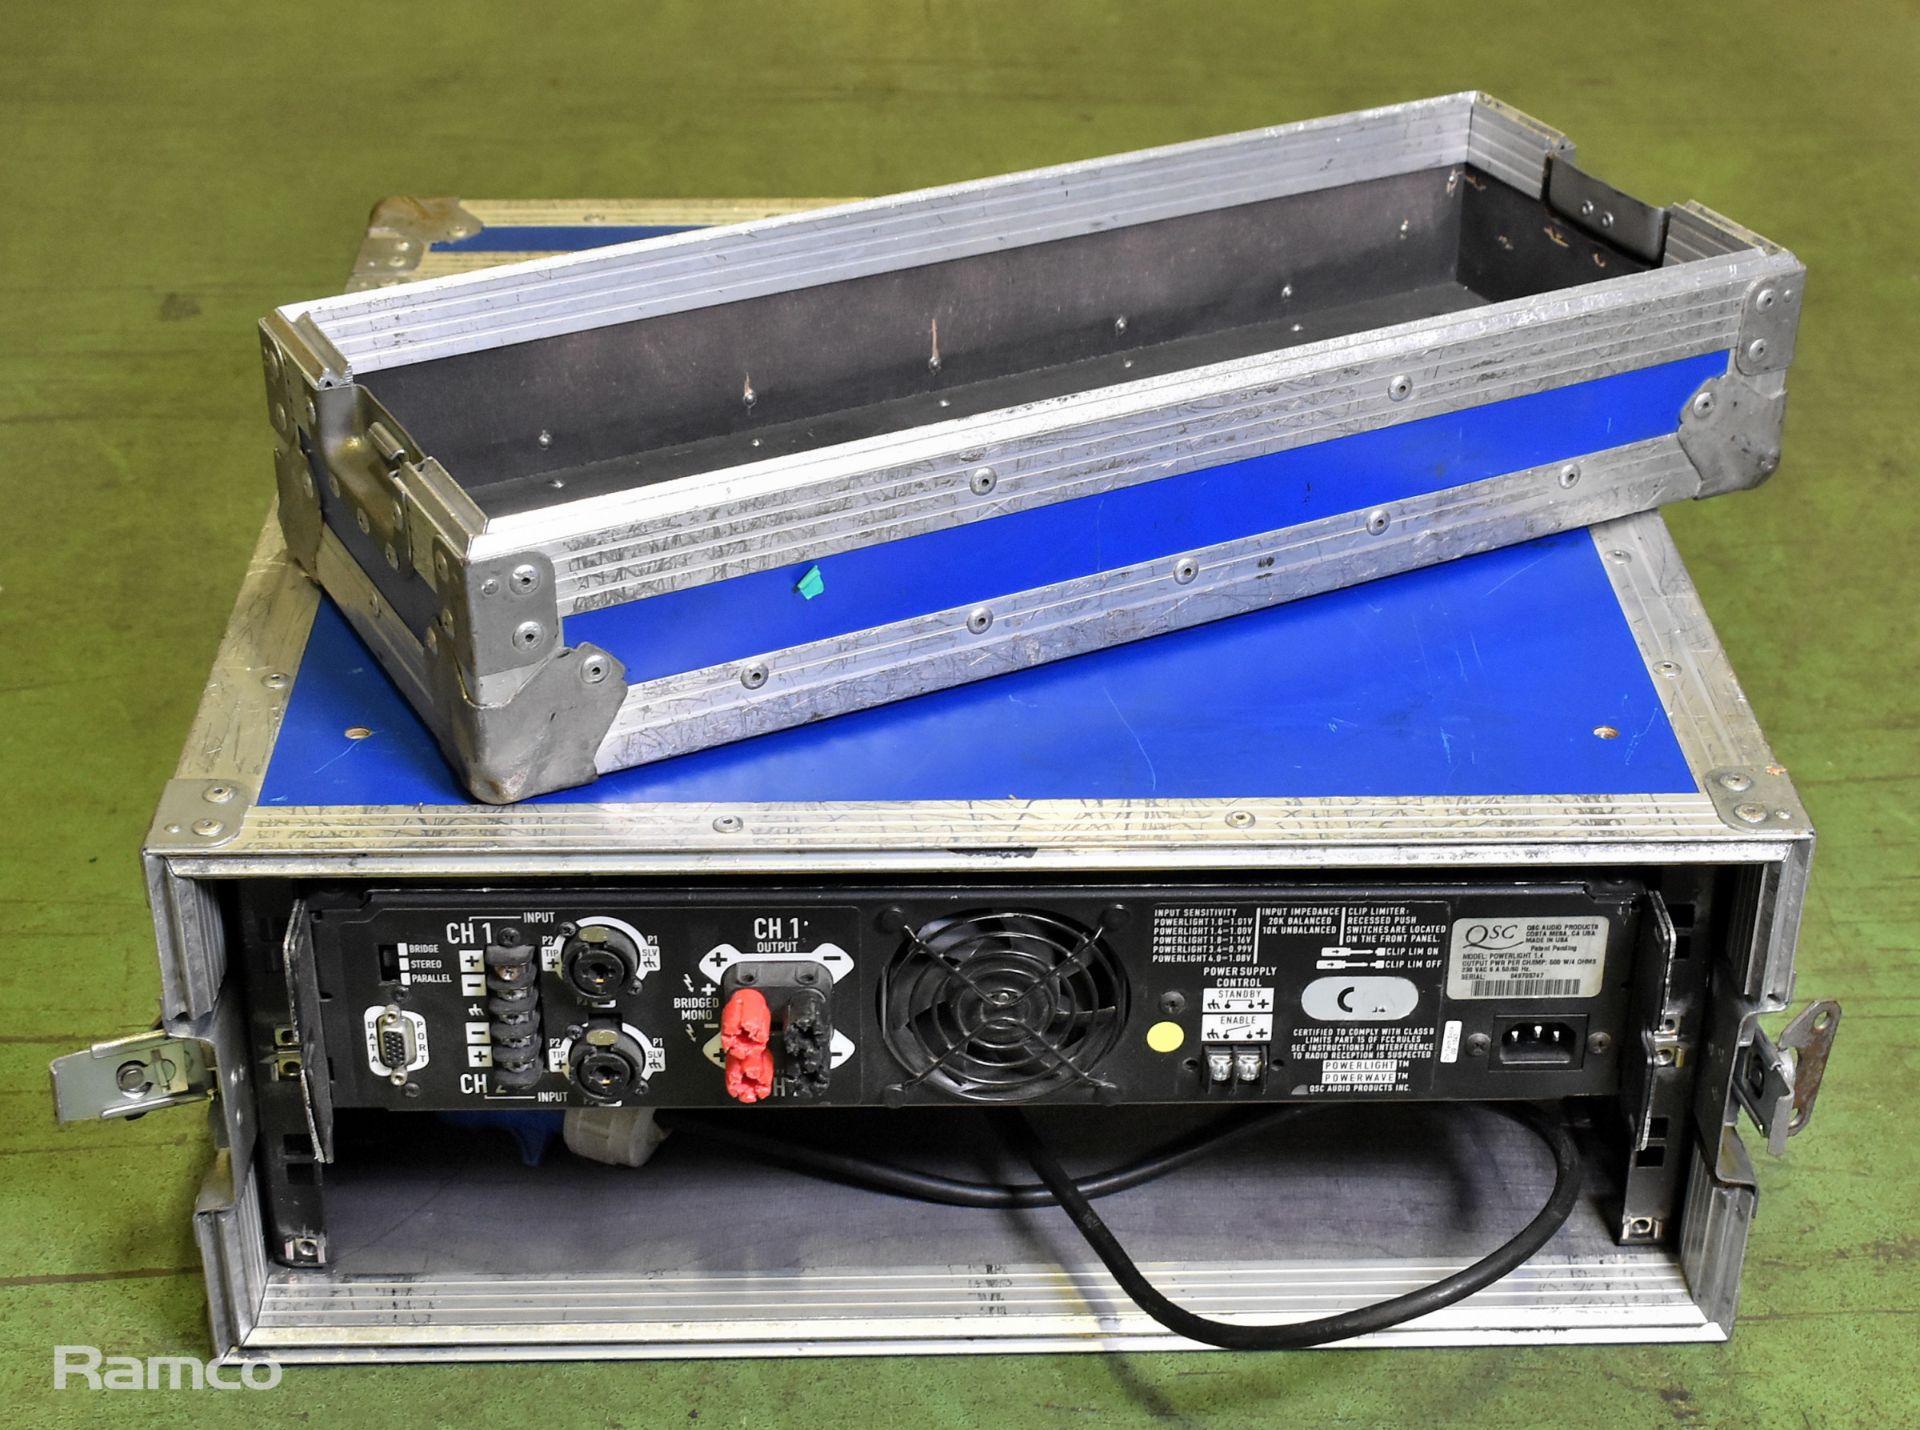 Lab Gruppen FP2600 amplifier and QSC Powerlight 1.4 amplifier in a flightcase - Image 4 of 7